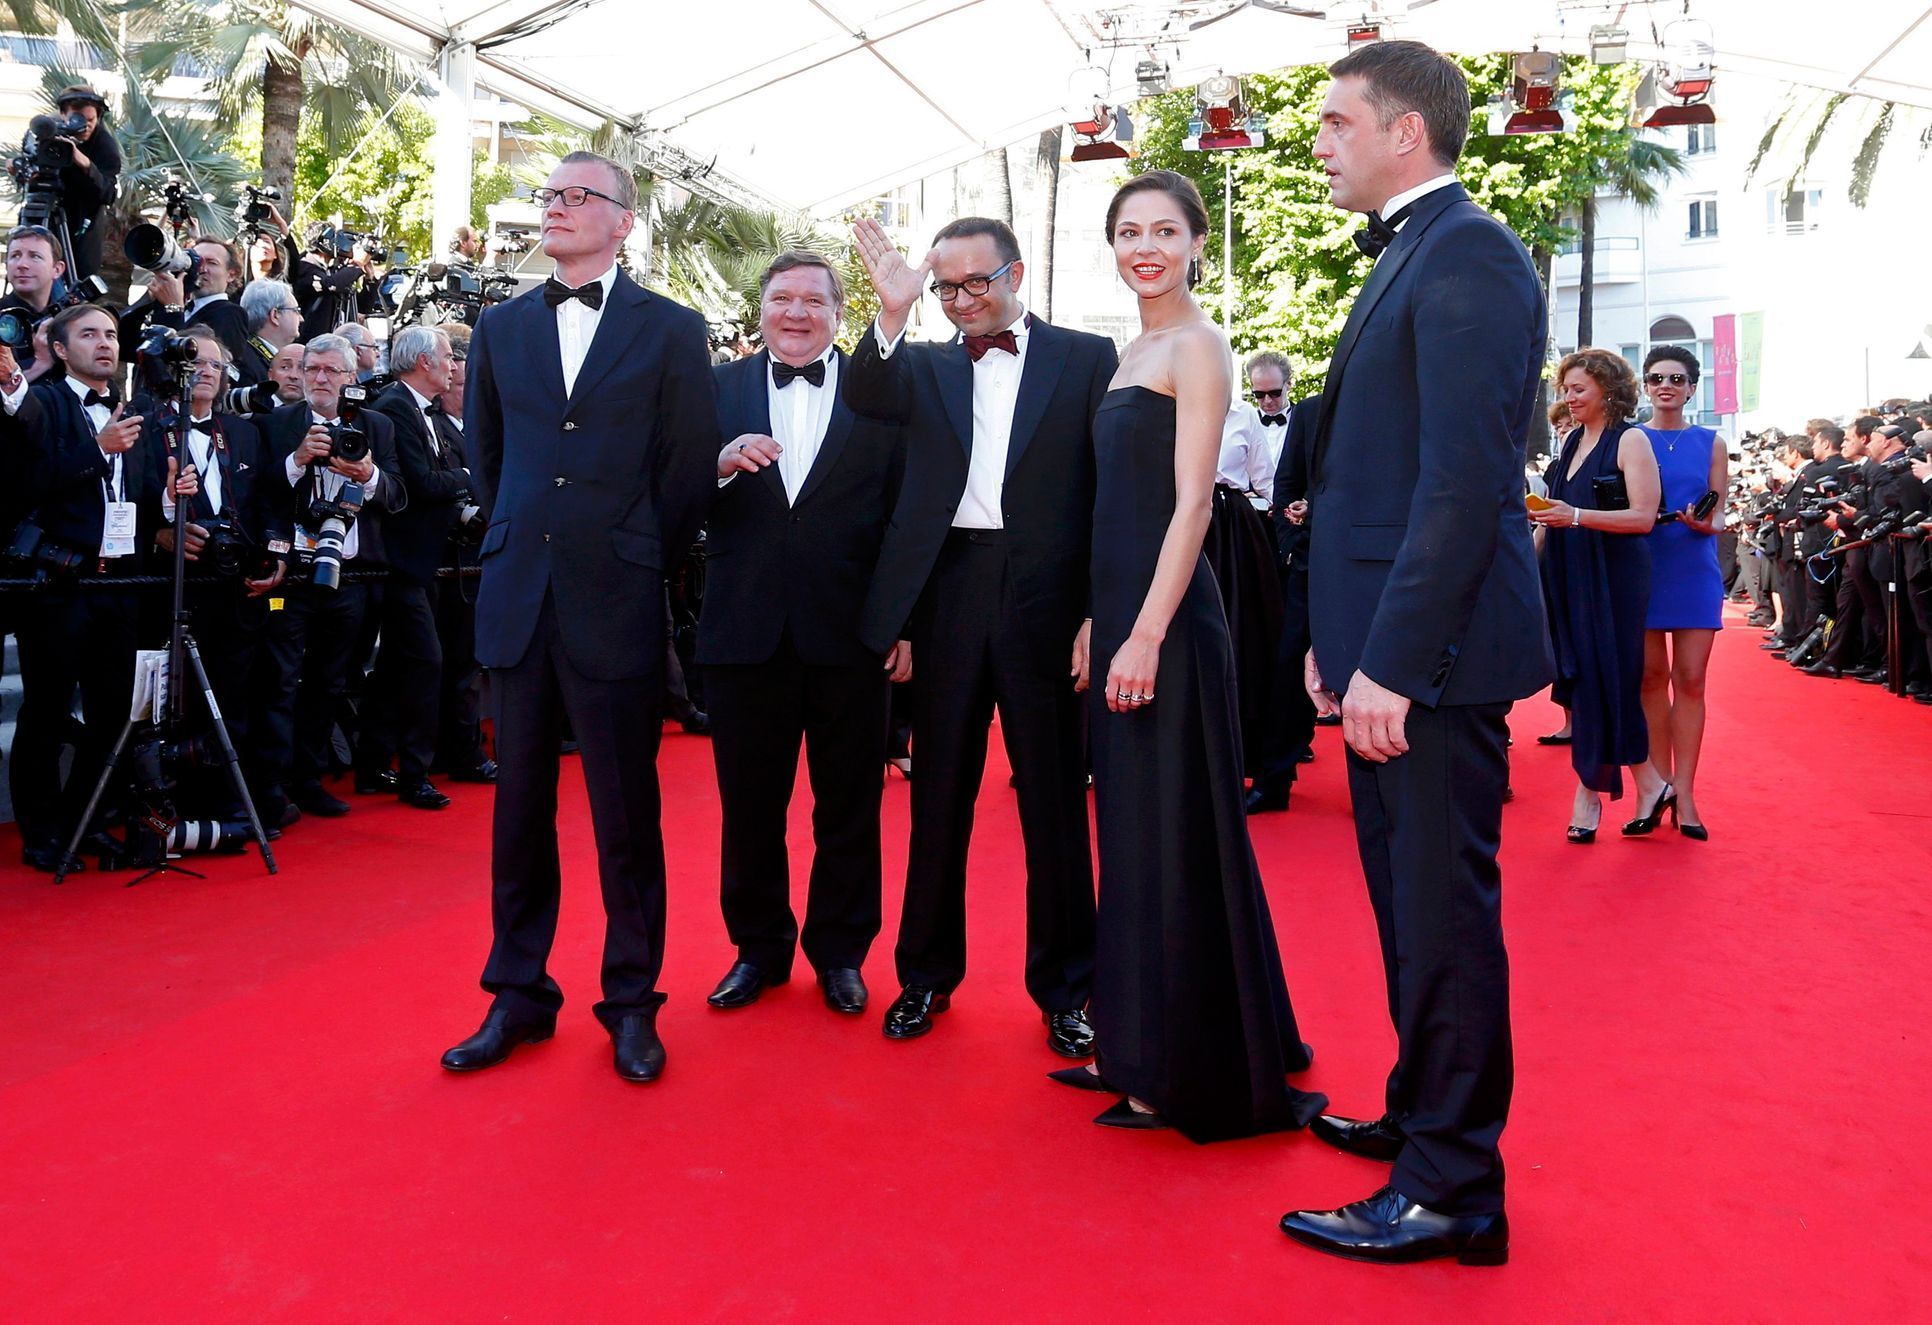 Director Andrey Zvyagintsev and cast members of his film &quot;Leviathan&quot; pose pose on the red carpet as they arrive at the closing ceremony of the 67th Cannes Film Festival in Cannes